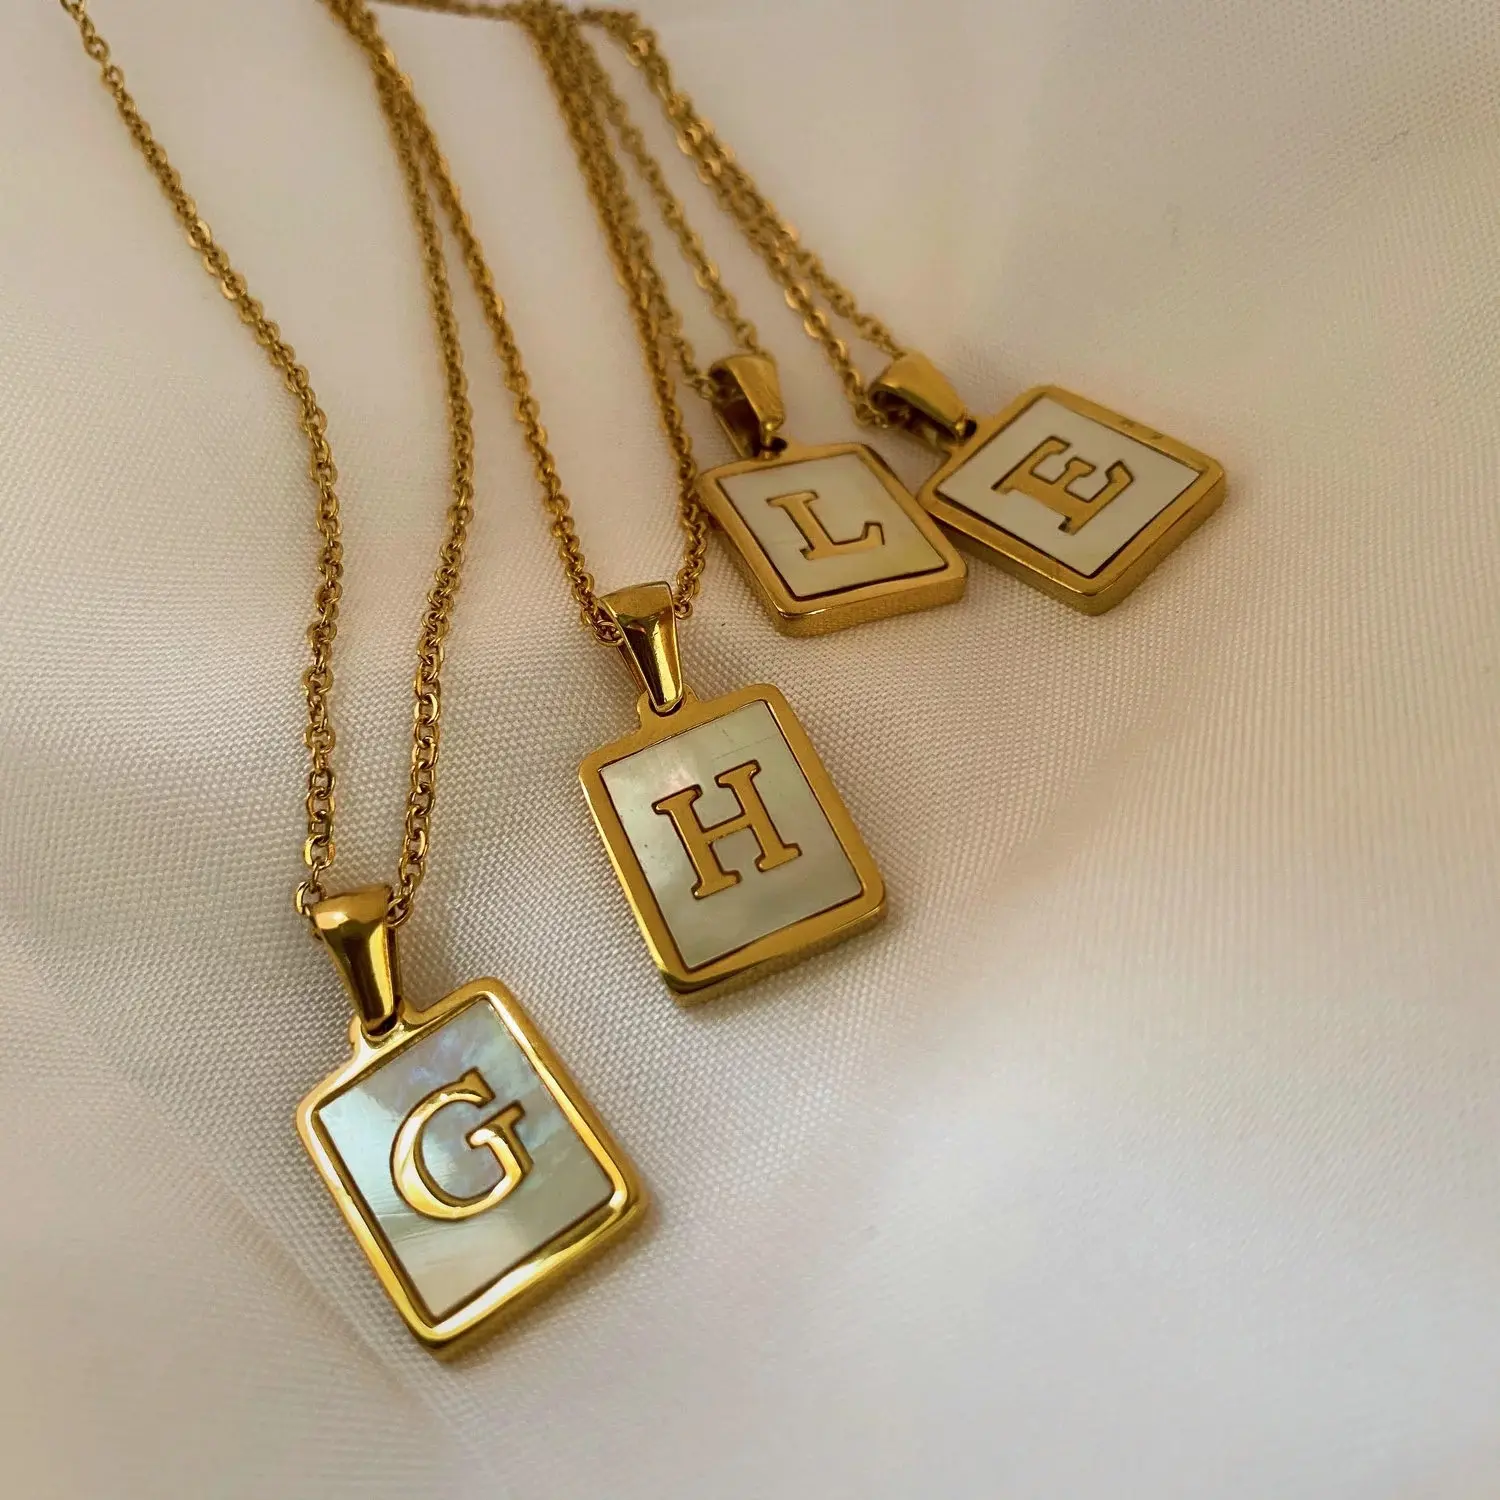 Fashion Rectangle Shell Necklace Pendant Women Stainless Steel A-Z Initial Letter Necklace PVD Gold Plated